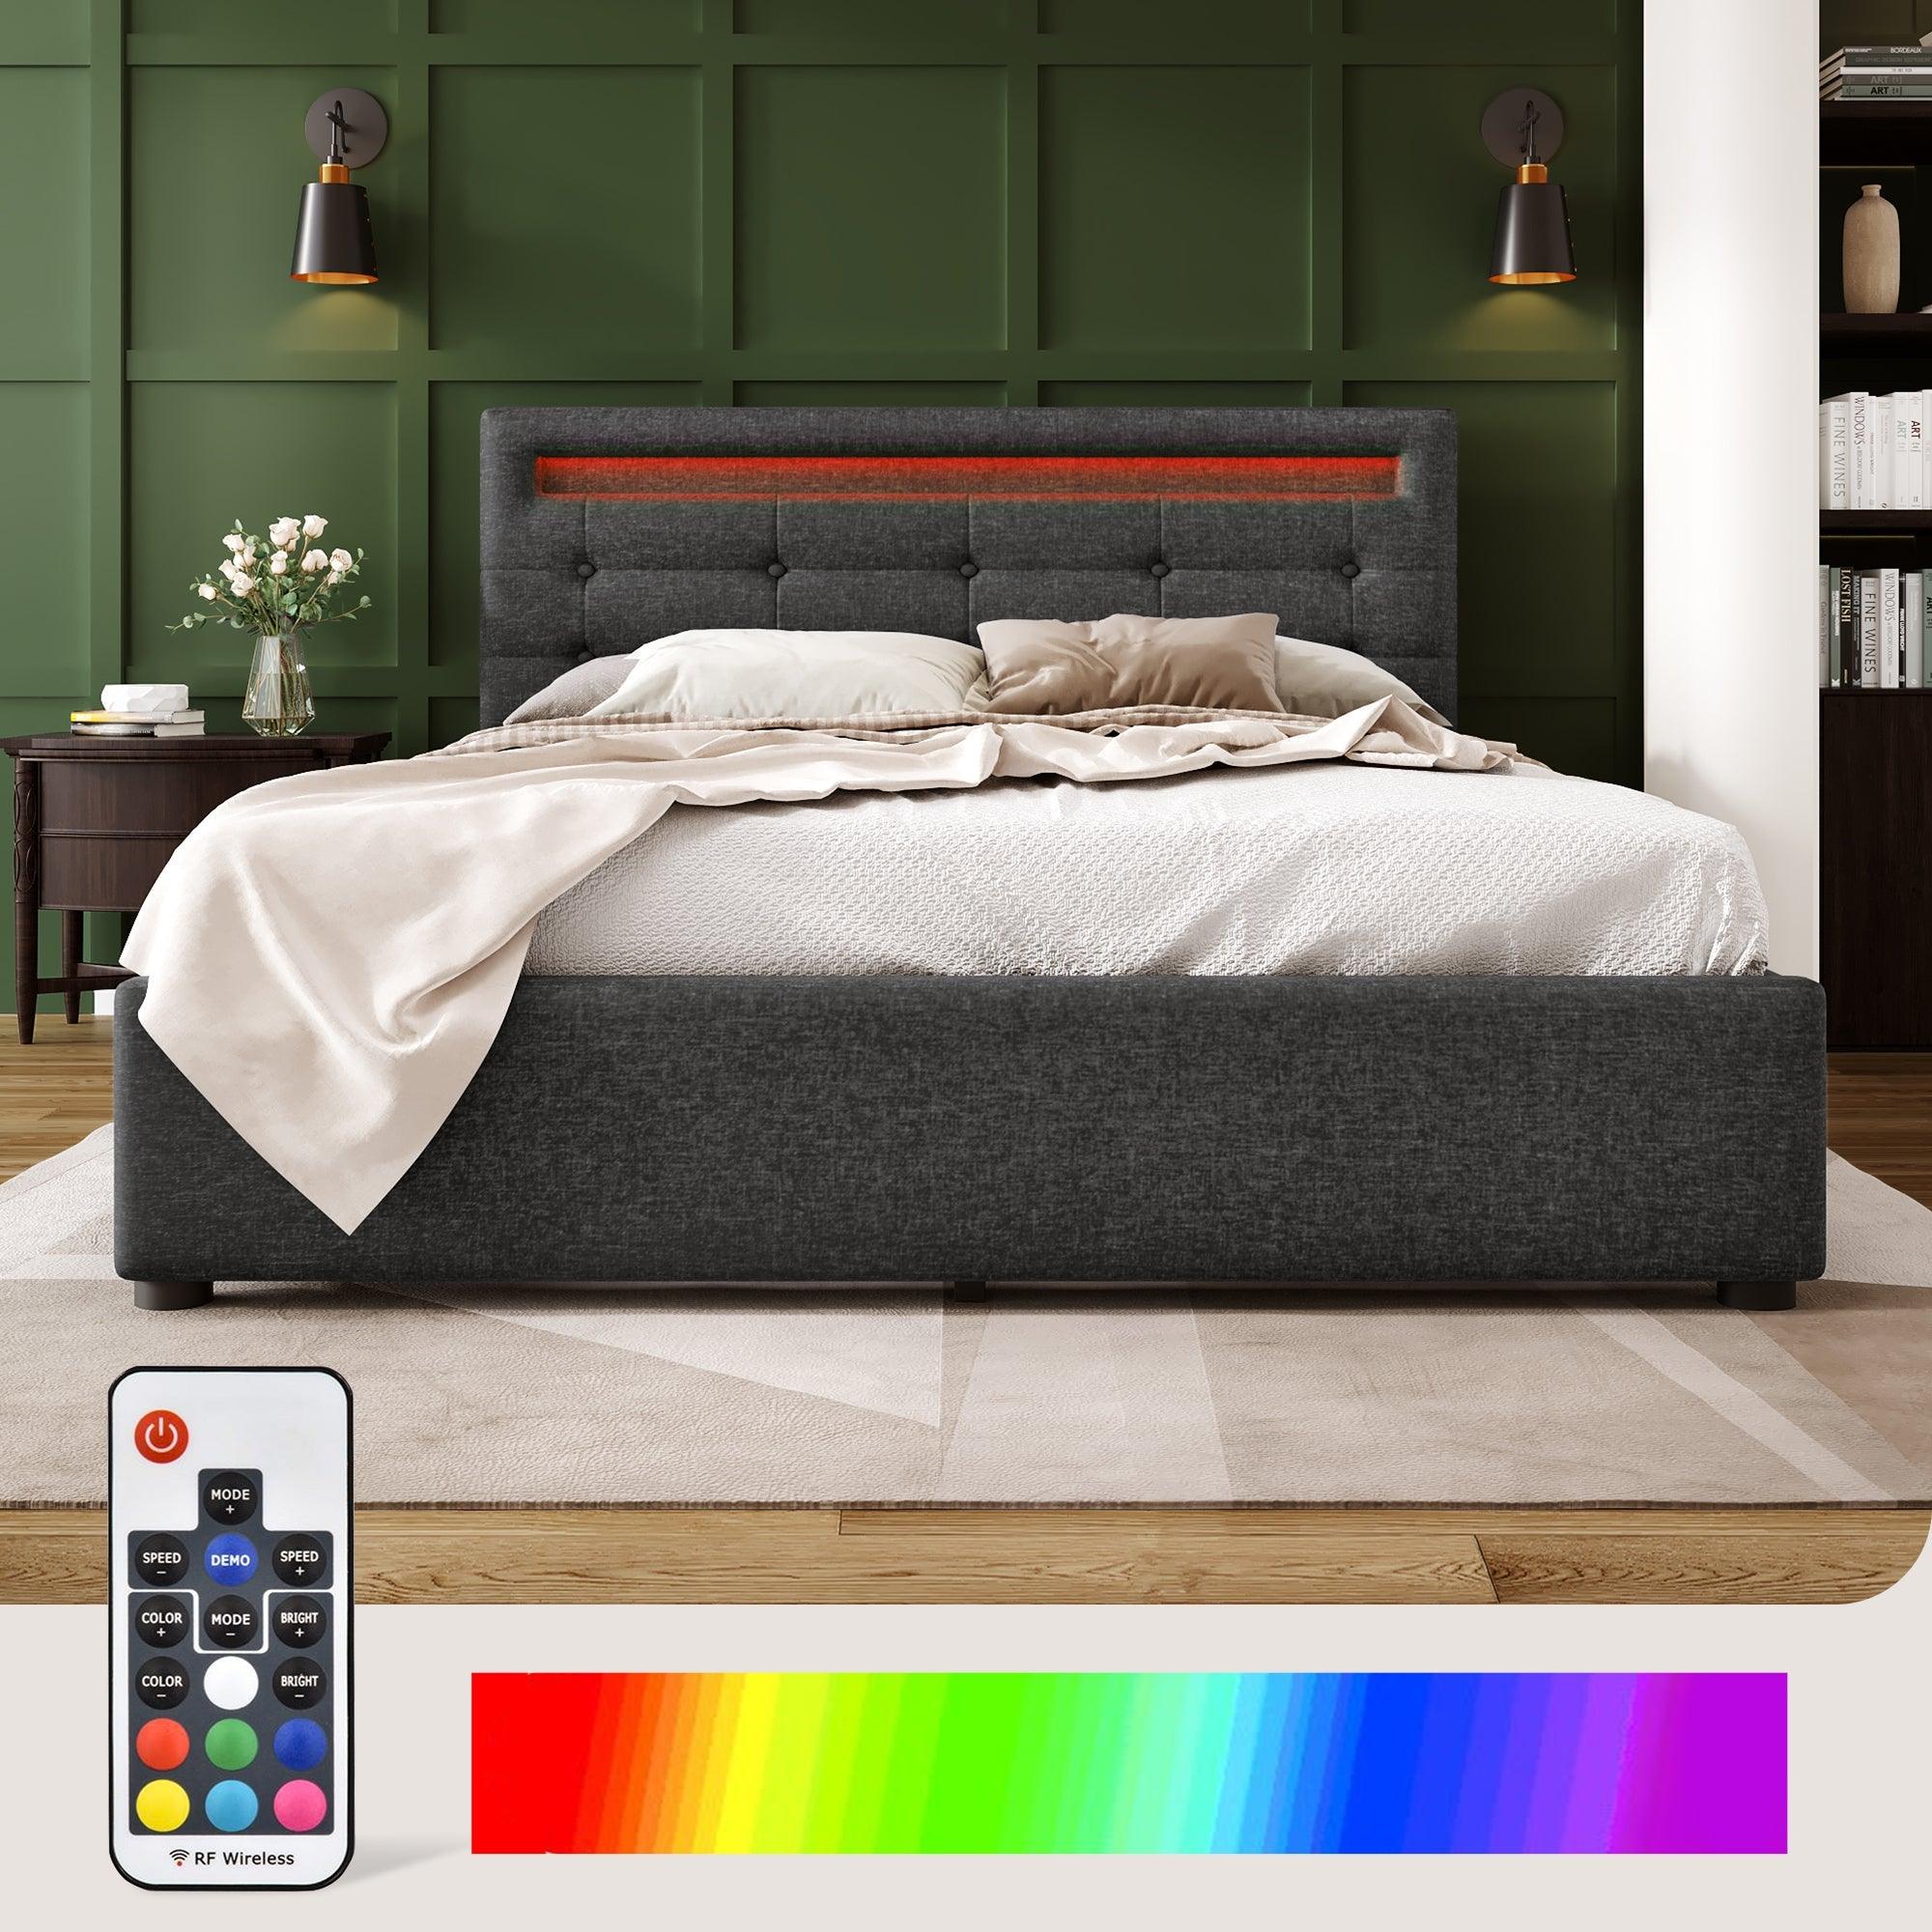 Bed Frame Queen Size, Upholstered Platform Bed Frame with 4 Storage Drawers and LED Lights & Adjustable Headboard, Gray LamCham